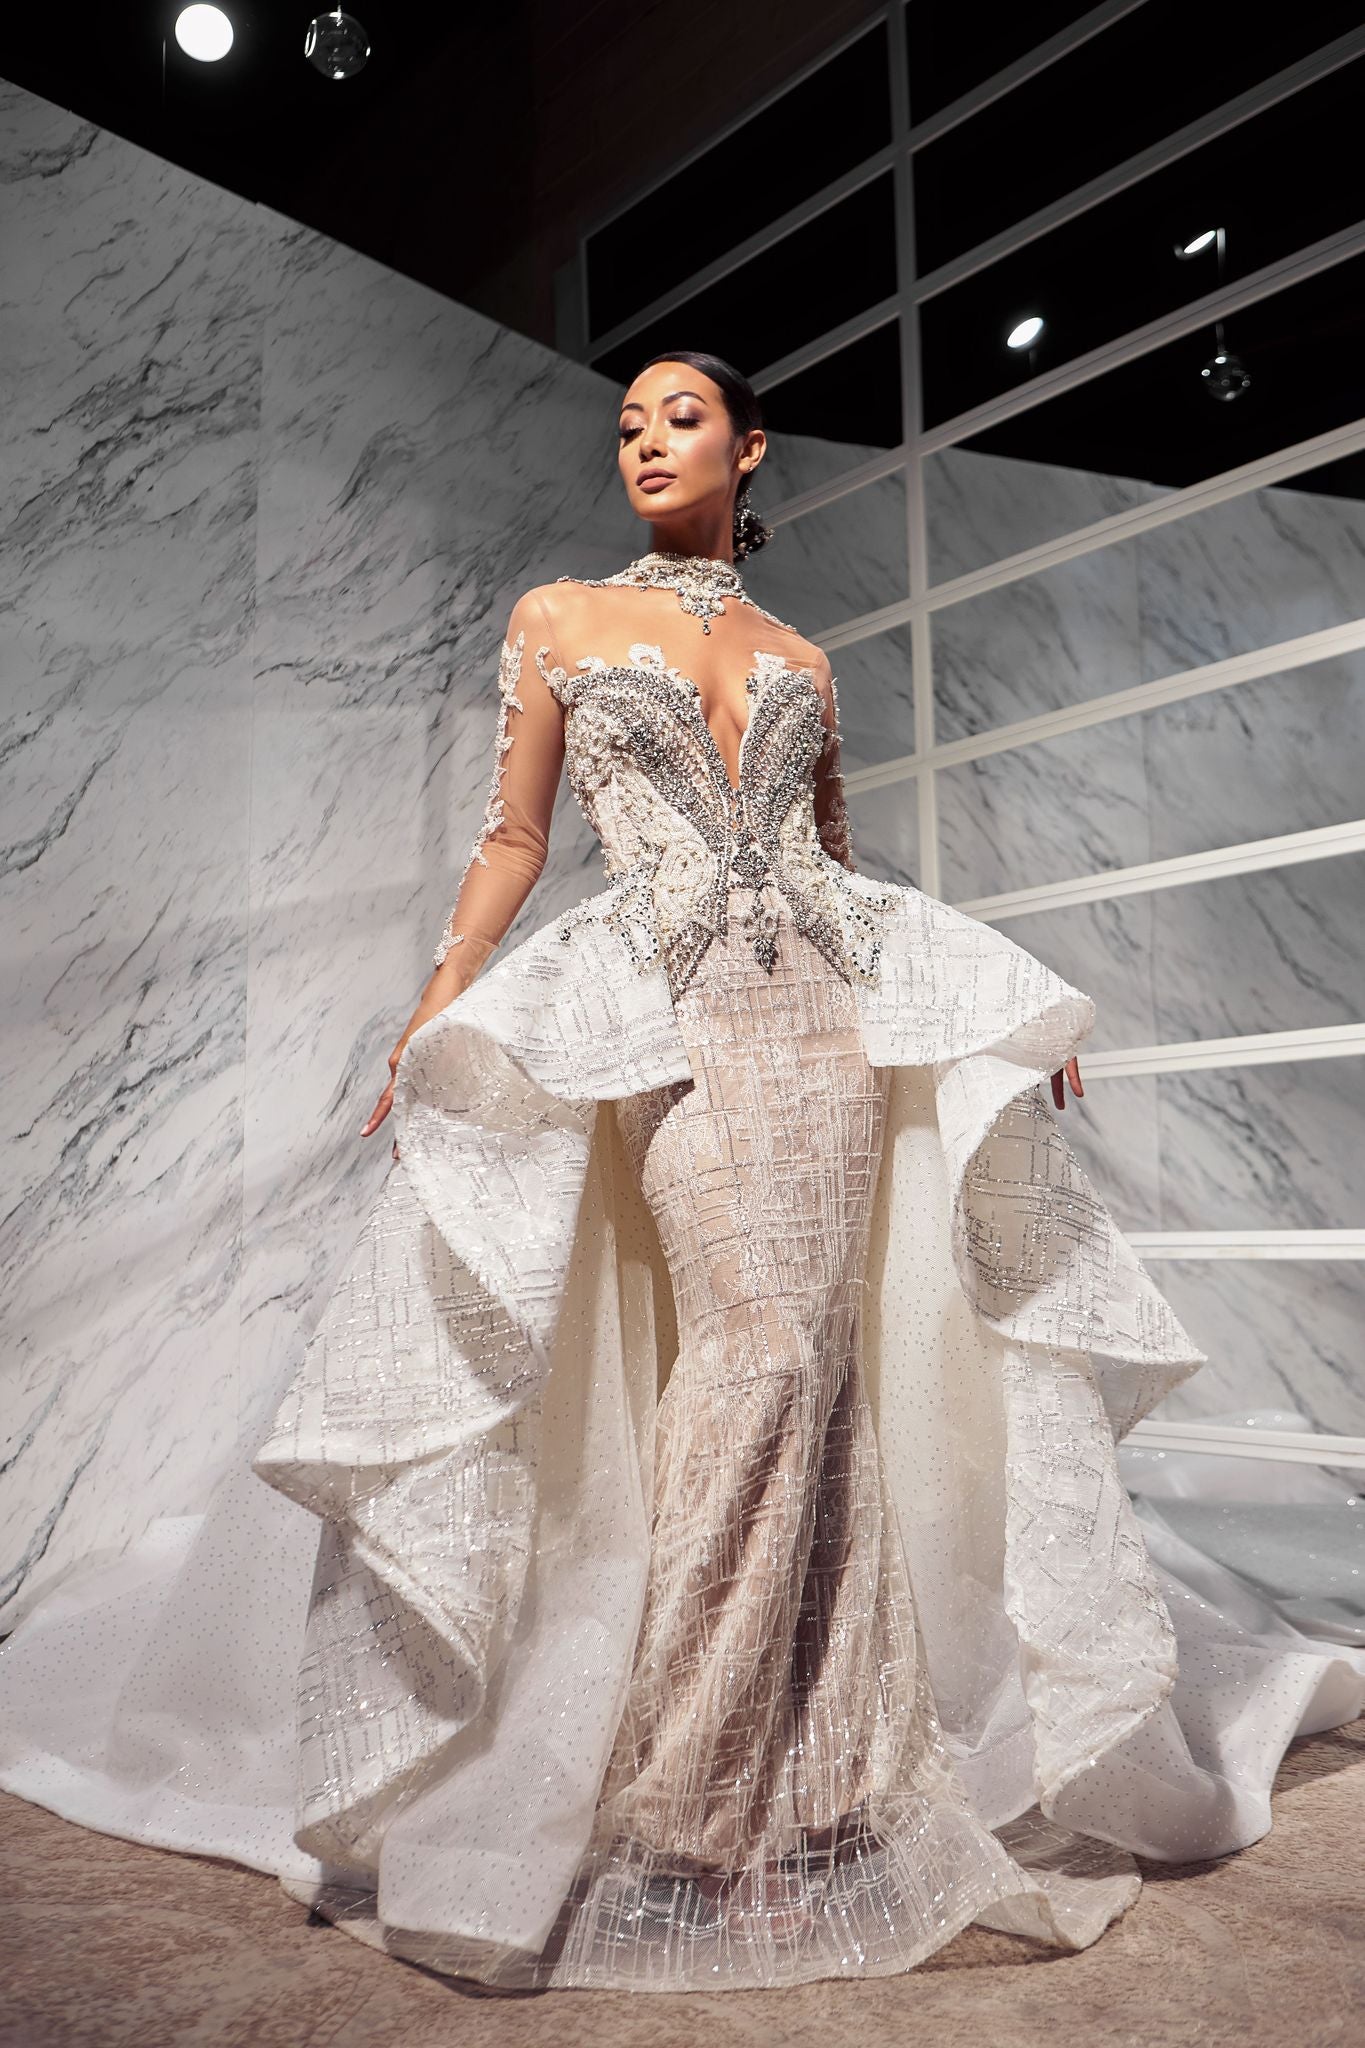 Ese Azenabor's Latest Bridal Collection Gives Hope For Brides-To-Be